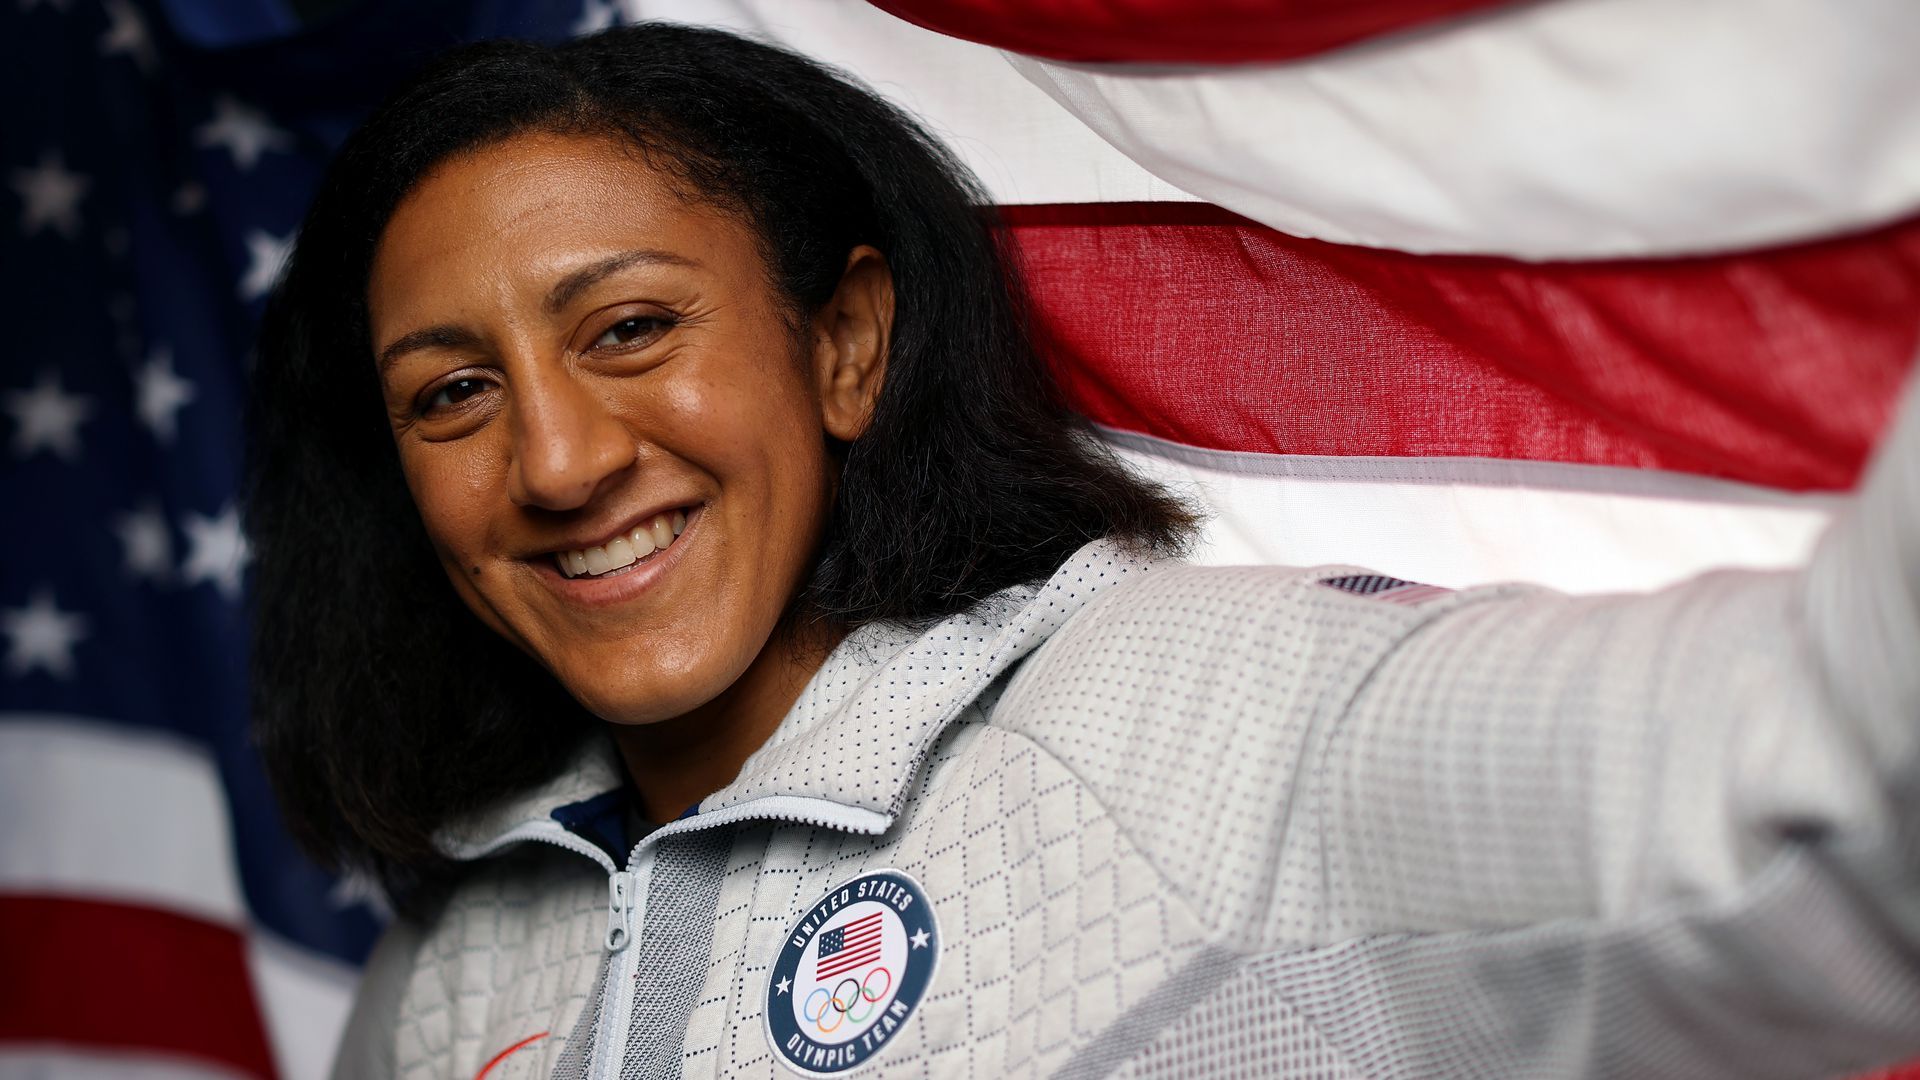 Elana Meyers Taylor poses for a portrait. Photo: Tom Pennington/Getty Images